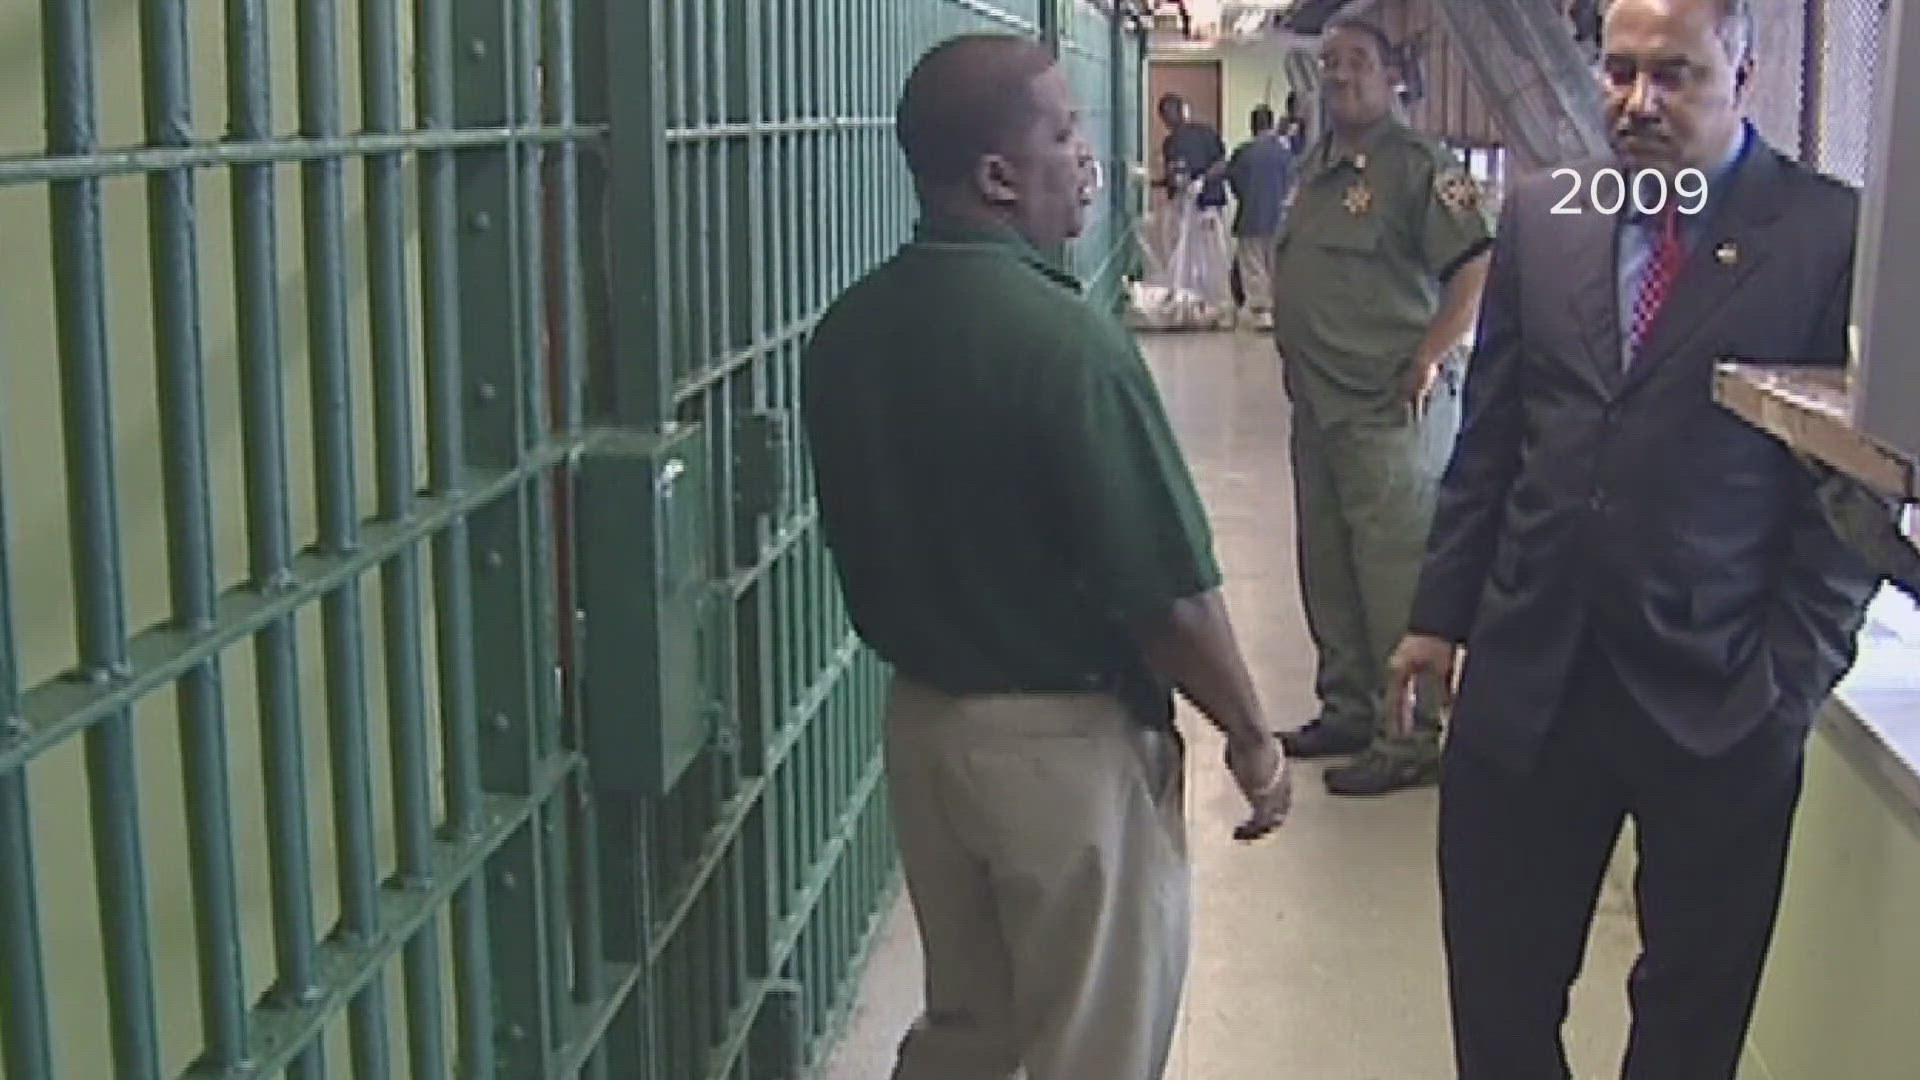 WWL Louisiana reporter Eleanor Tabone sat down with a New Orleans man who was in the jail when Hurricane Katrina hit.